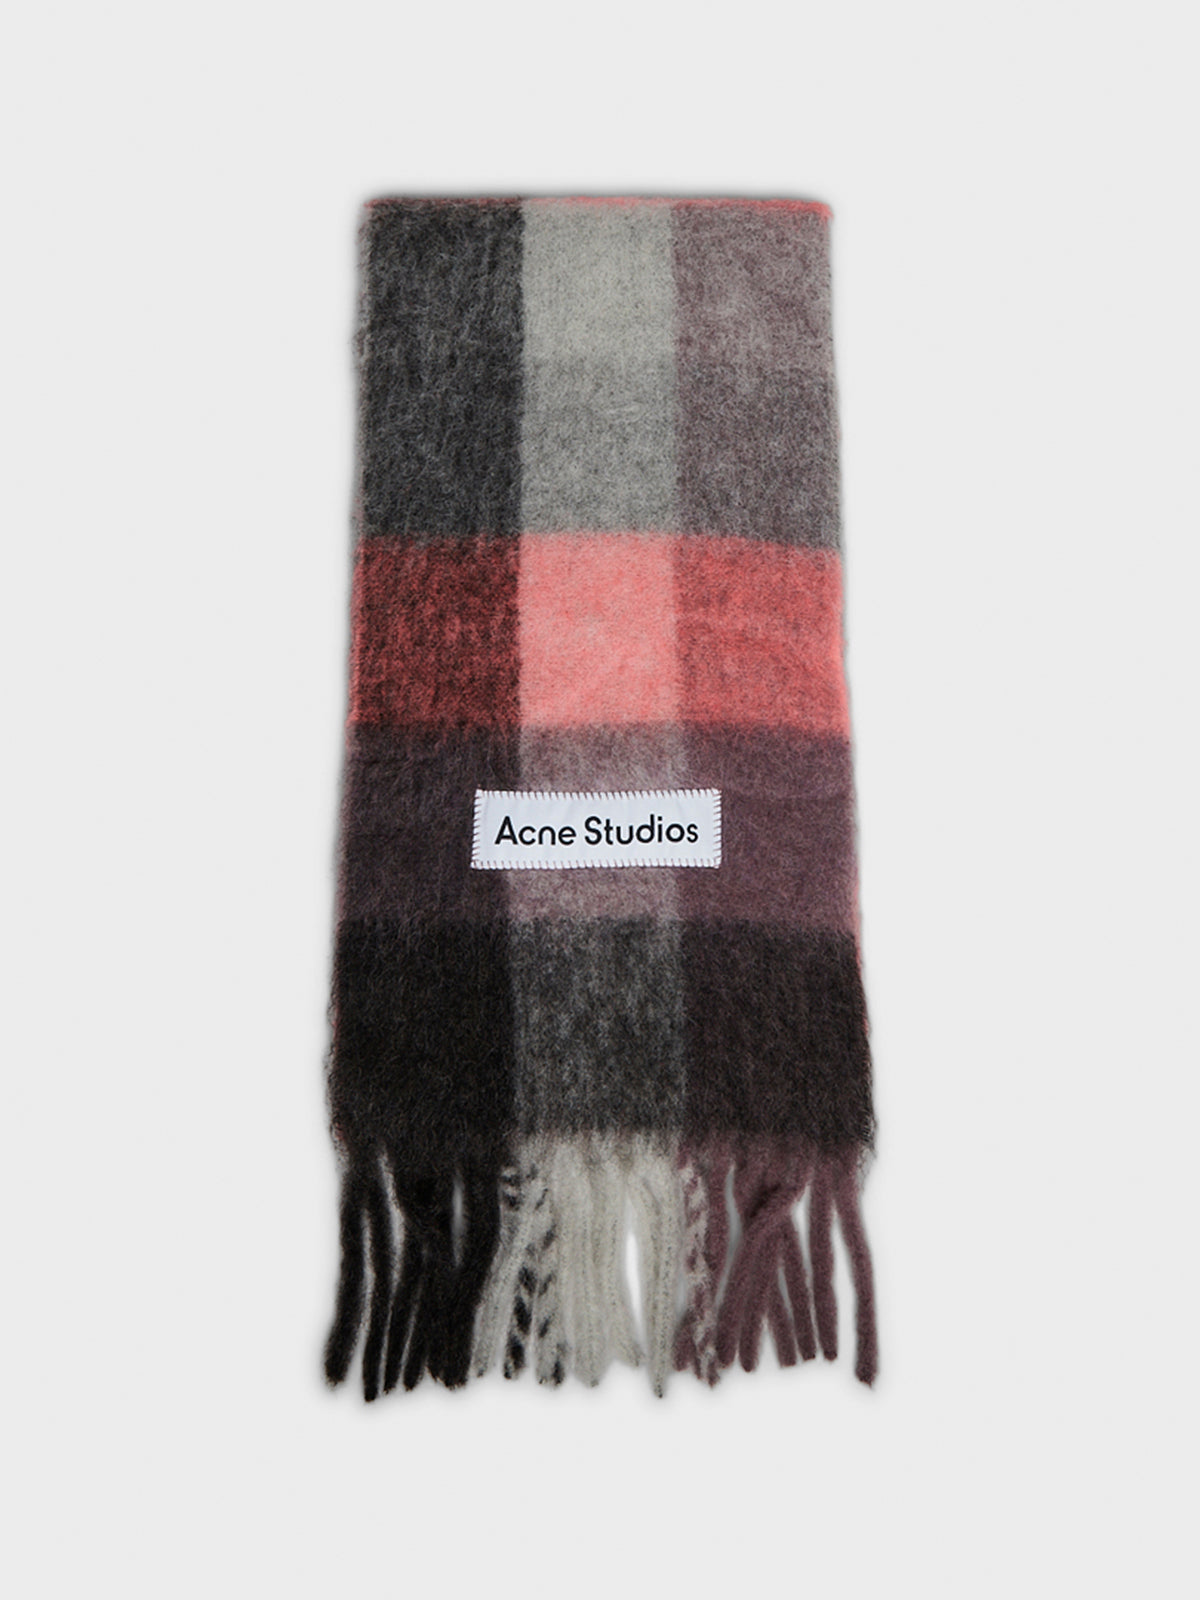 Acne Studios - Mohair Checked Scarf in Mauve, Bright Pink and Anthracite